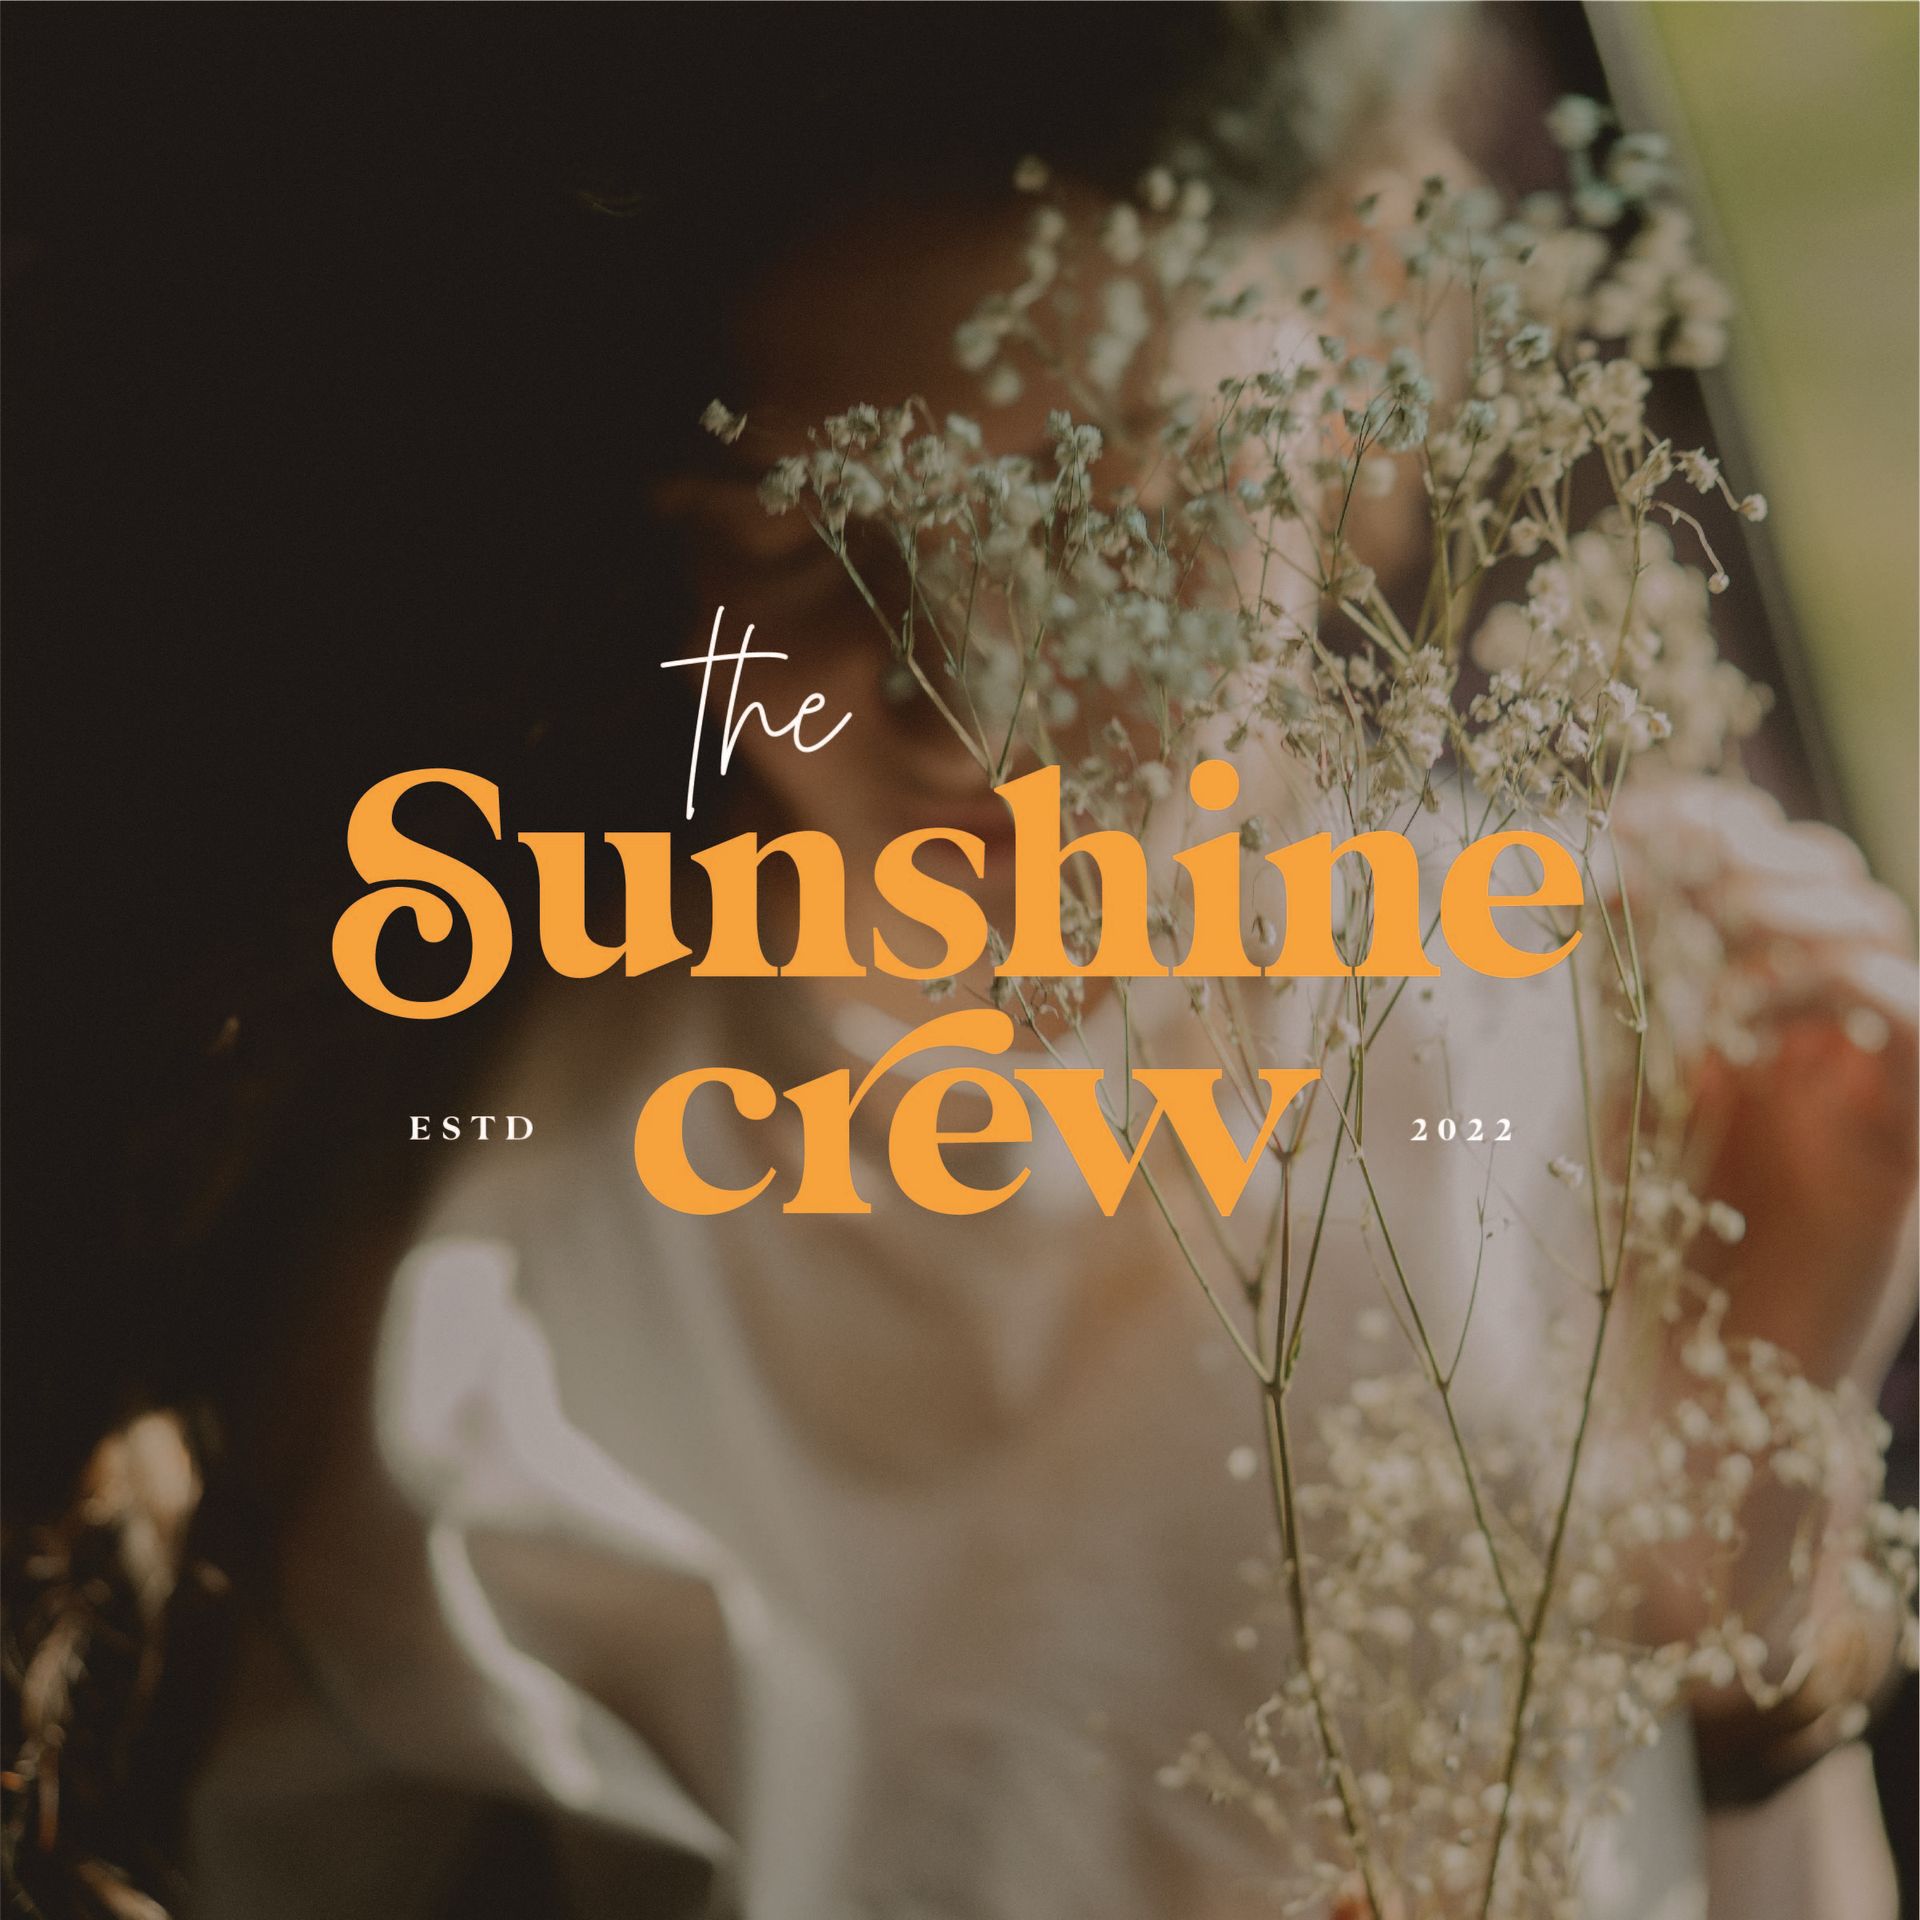 A poster for the sunshine crew shows a woman holding flowers Semi Custom Brand Kits